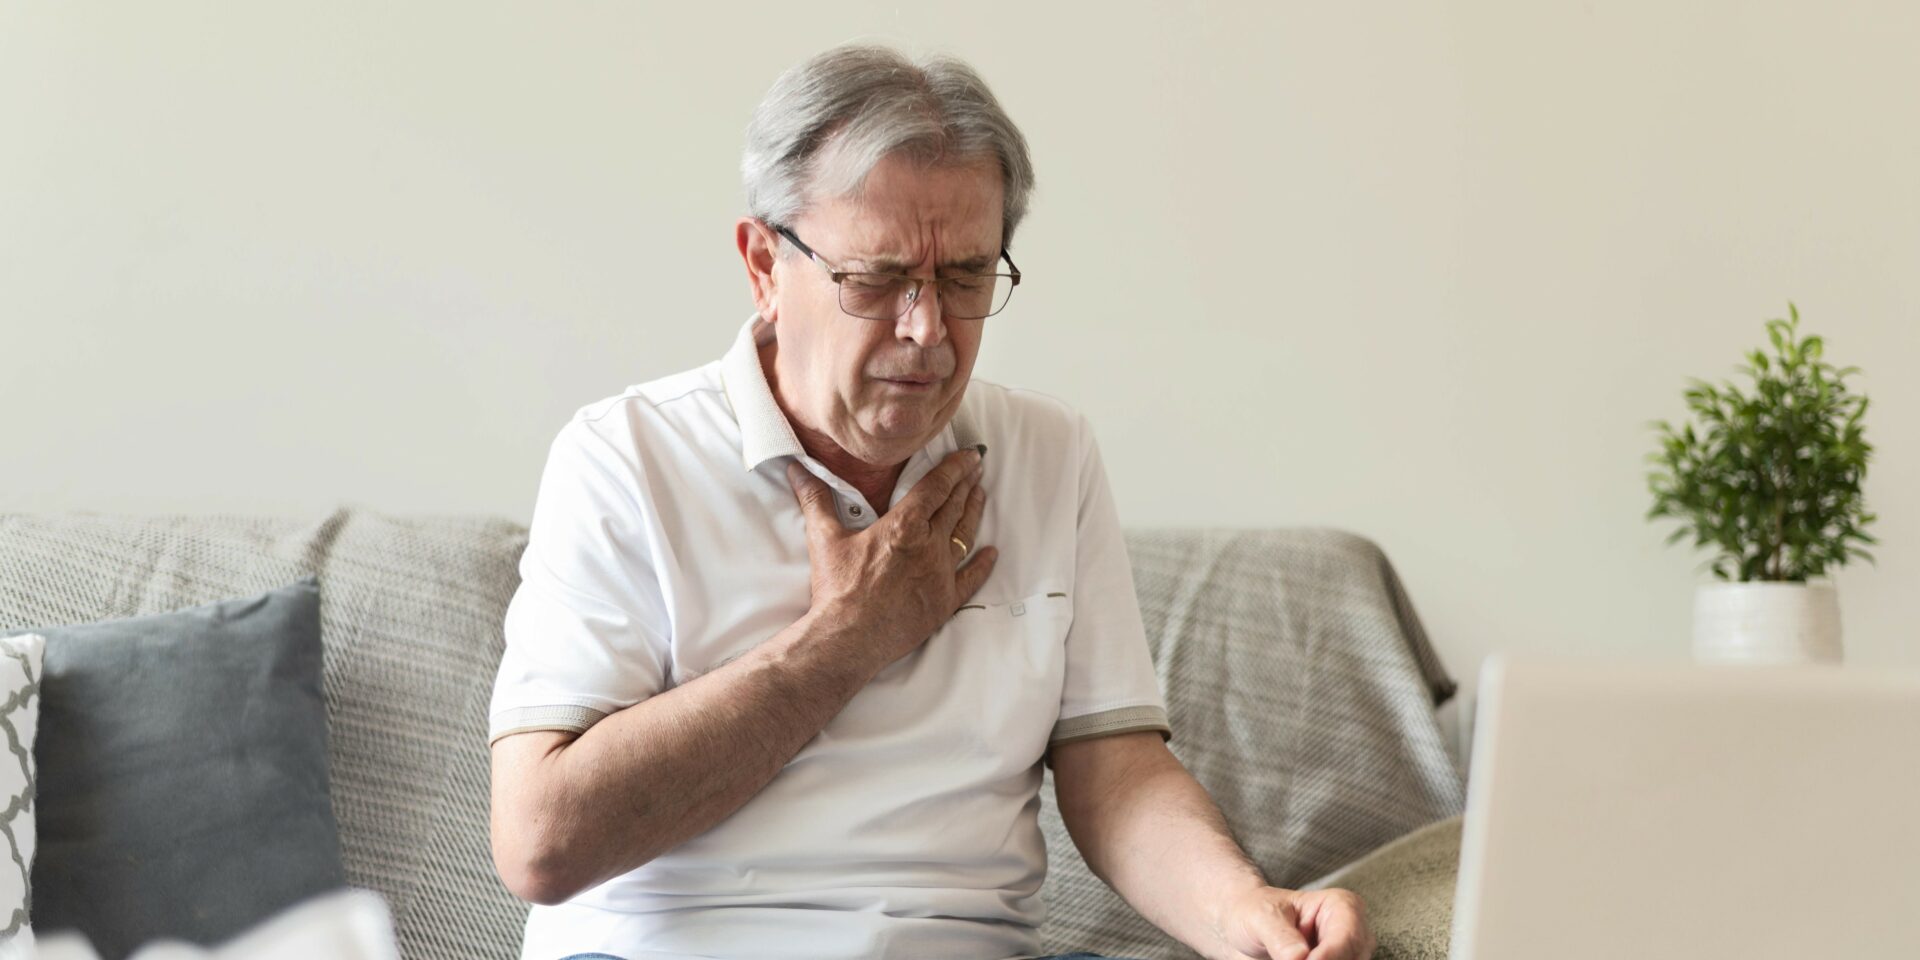 An elderly man sits on his couch experiencing chest pain after being exposed to asbestos insulation in Australia.